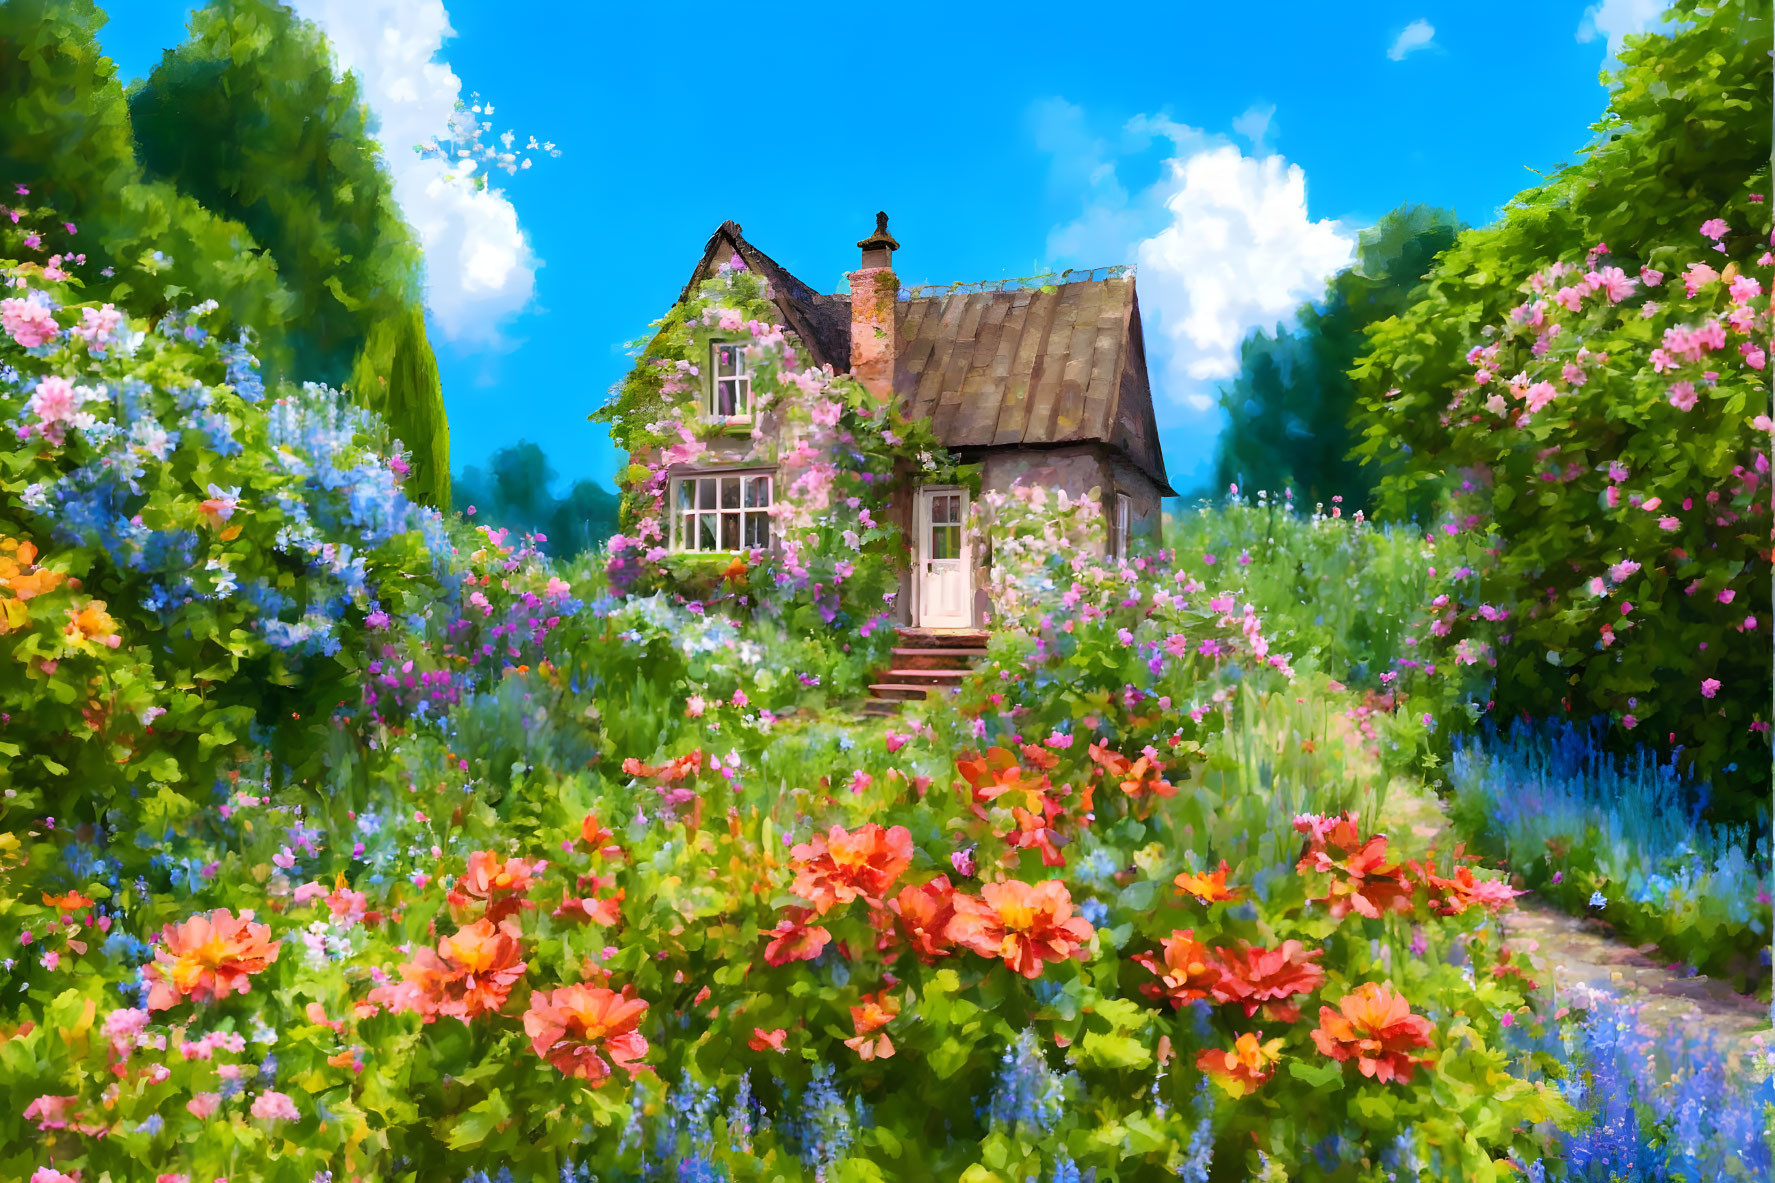 Cottage in the country